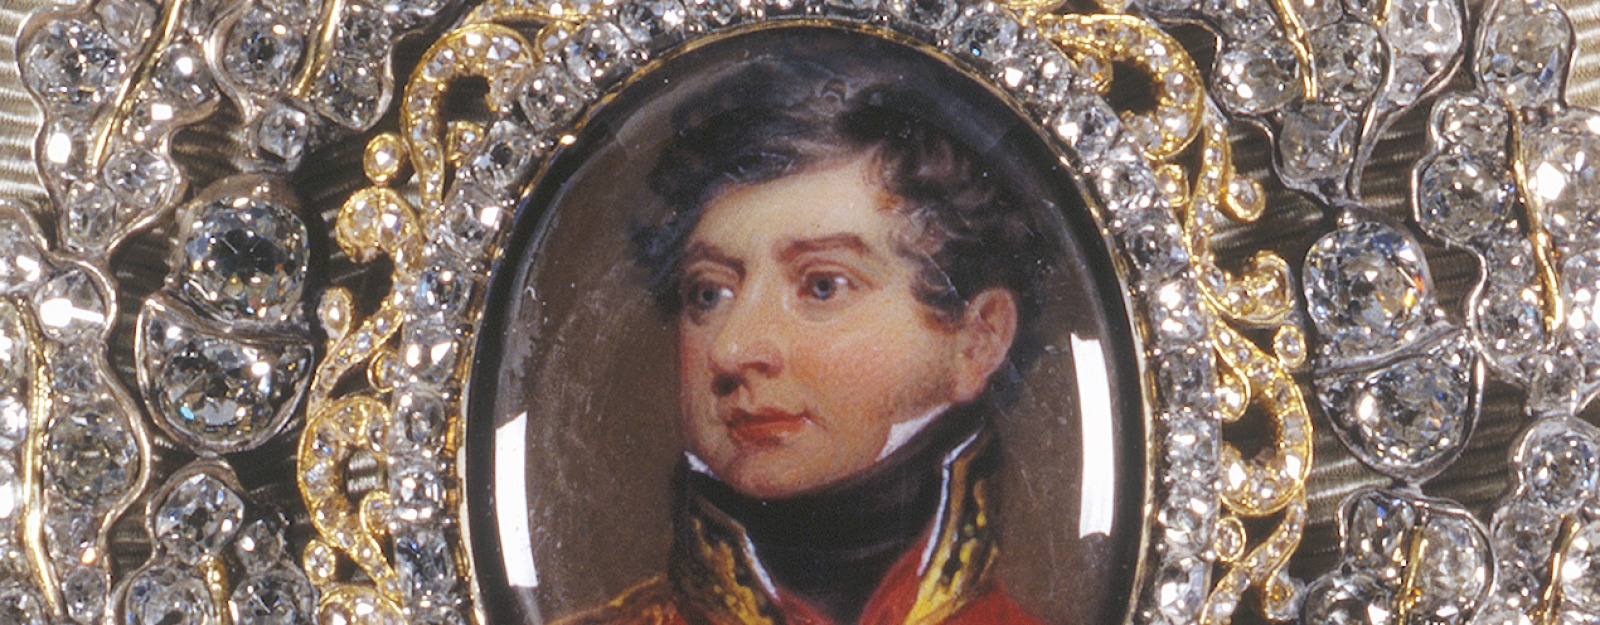 Detail of the badge, Family Order of King George IV. Showing his portrait surrounded by diamonds.